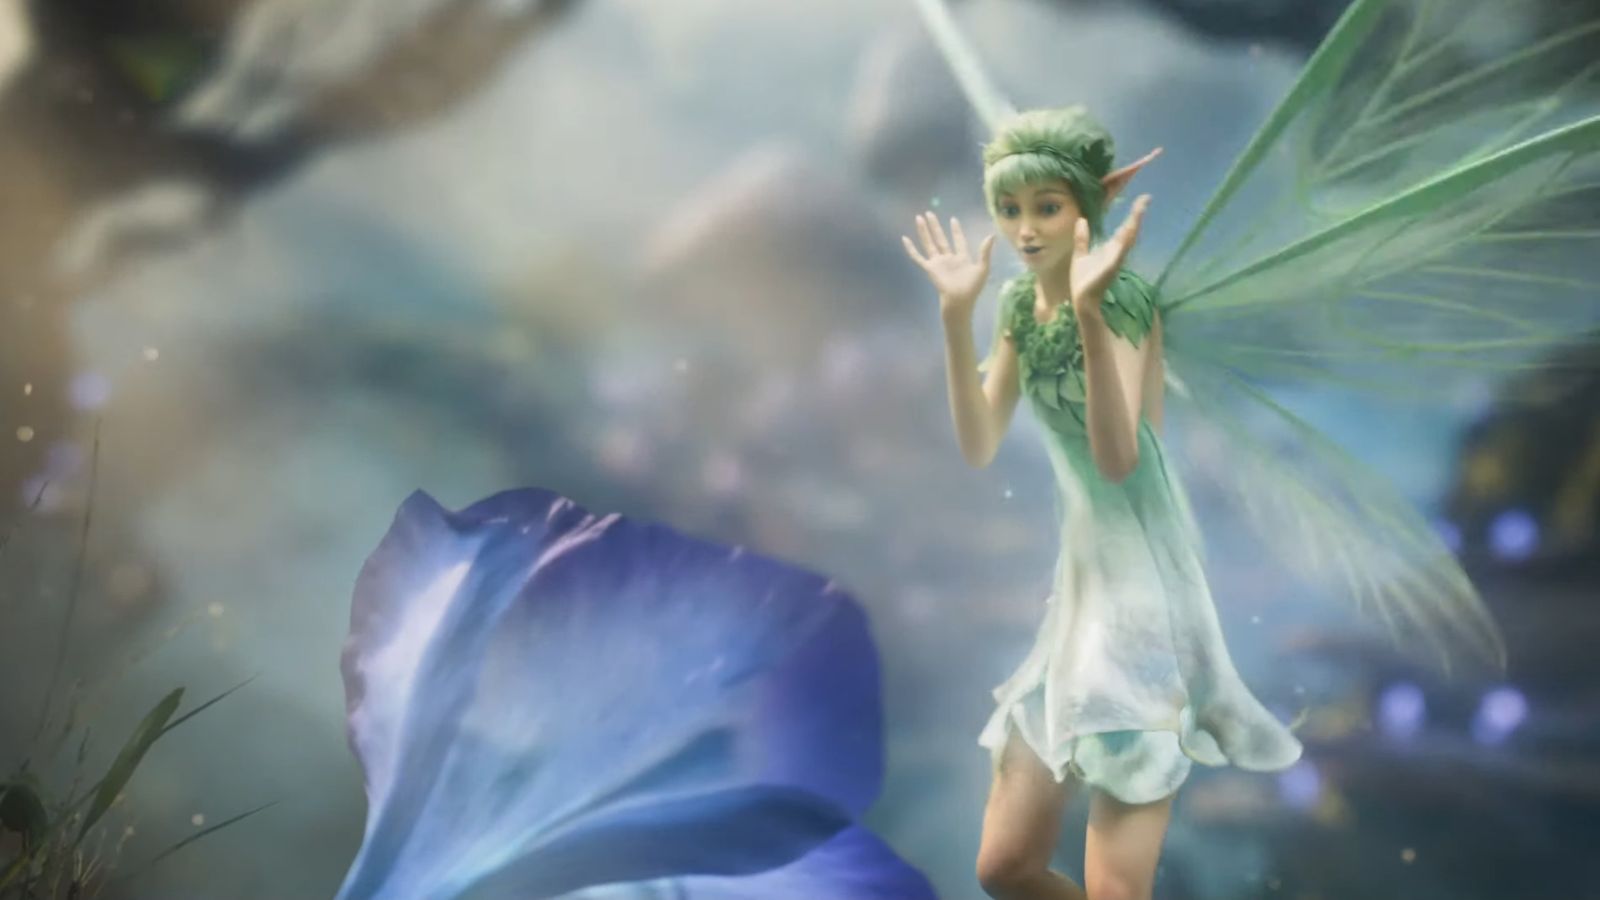 Image showing fairy near a blue flower